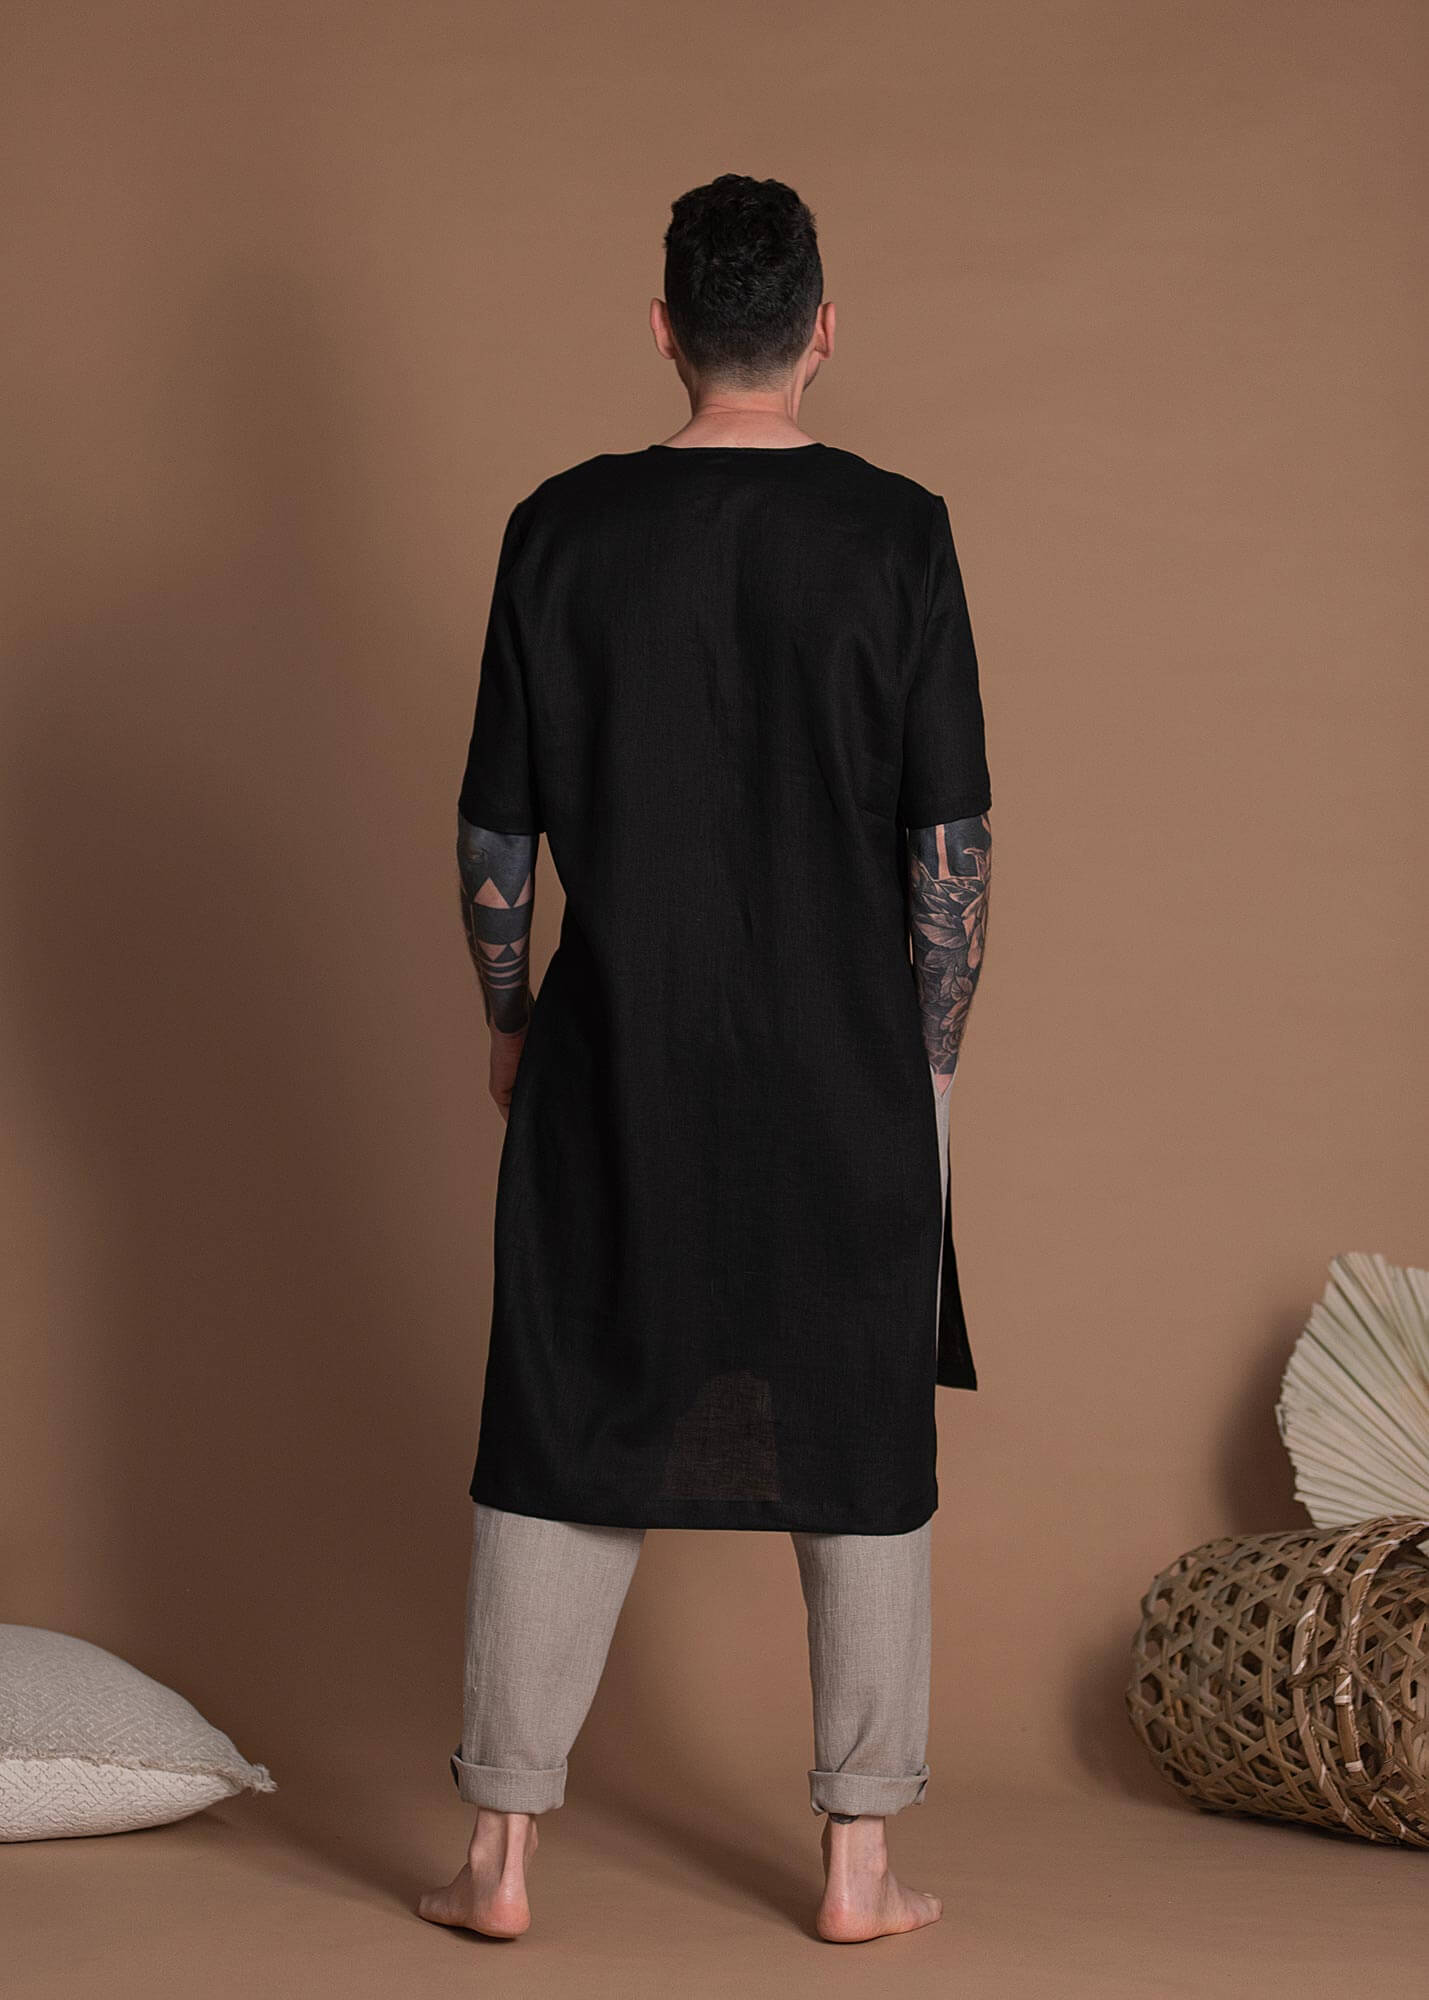 Men's Black Linen Shirt With Short Sleeves And High Side Slits